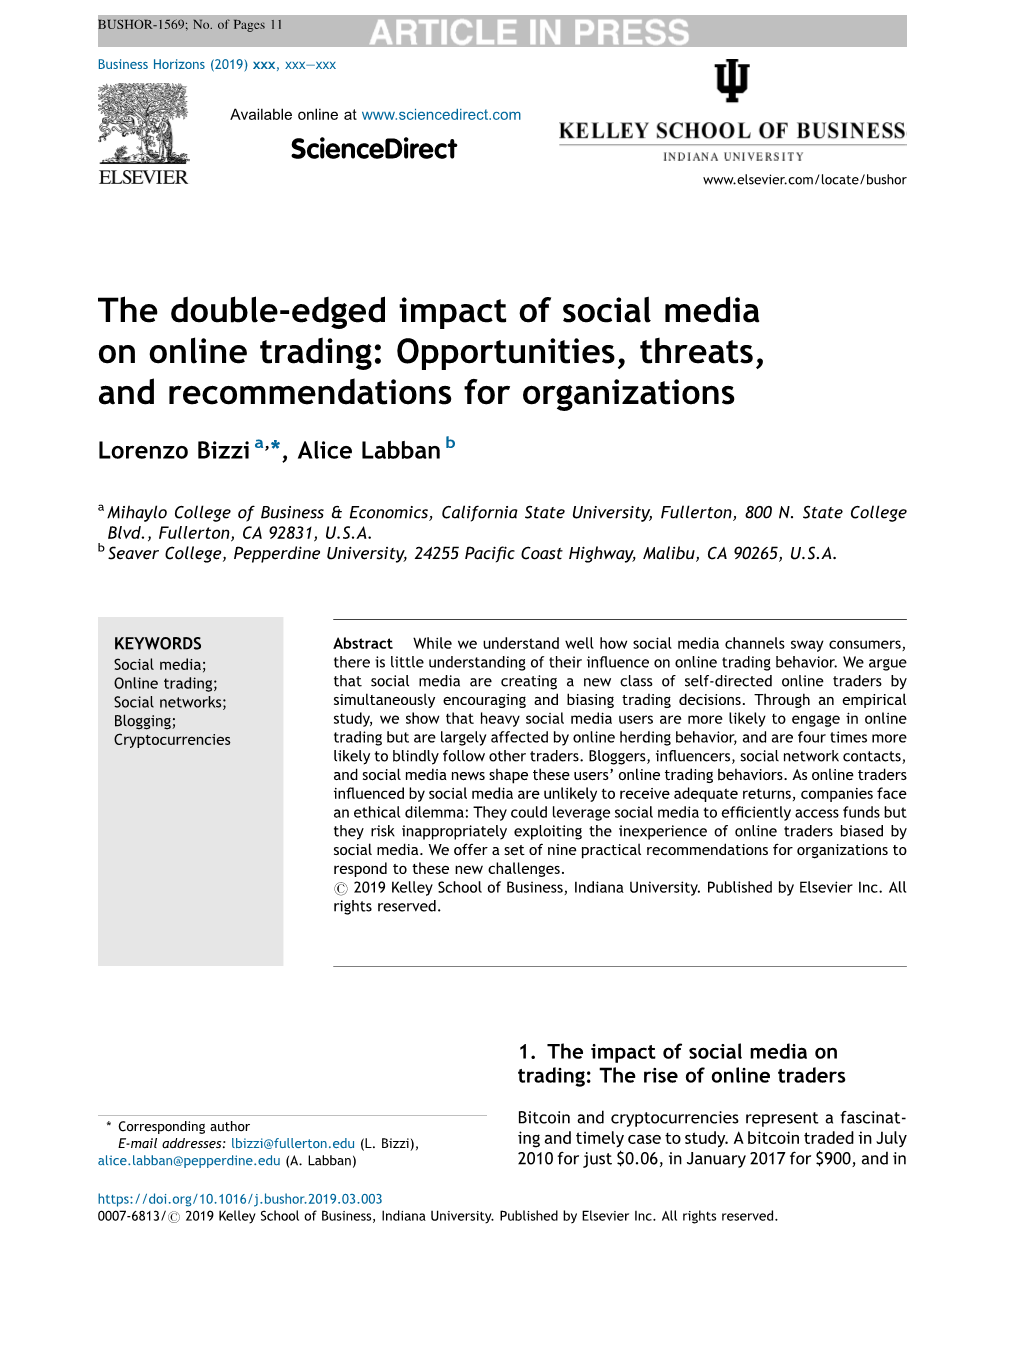 The Double-Edged Impact of Social Media on Online Trading 3